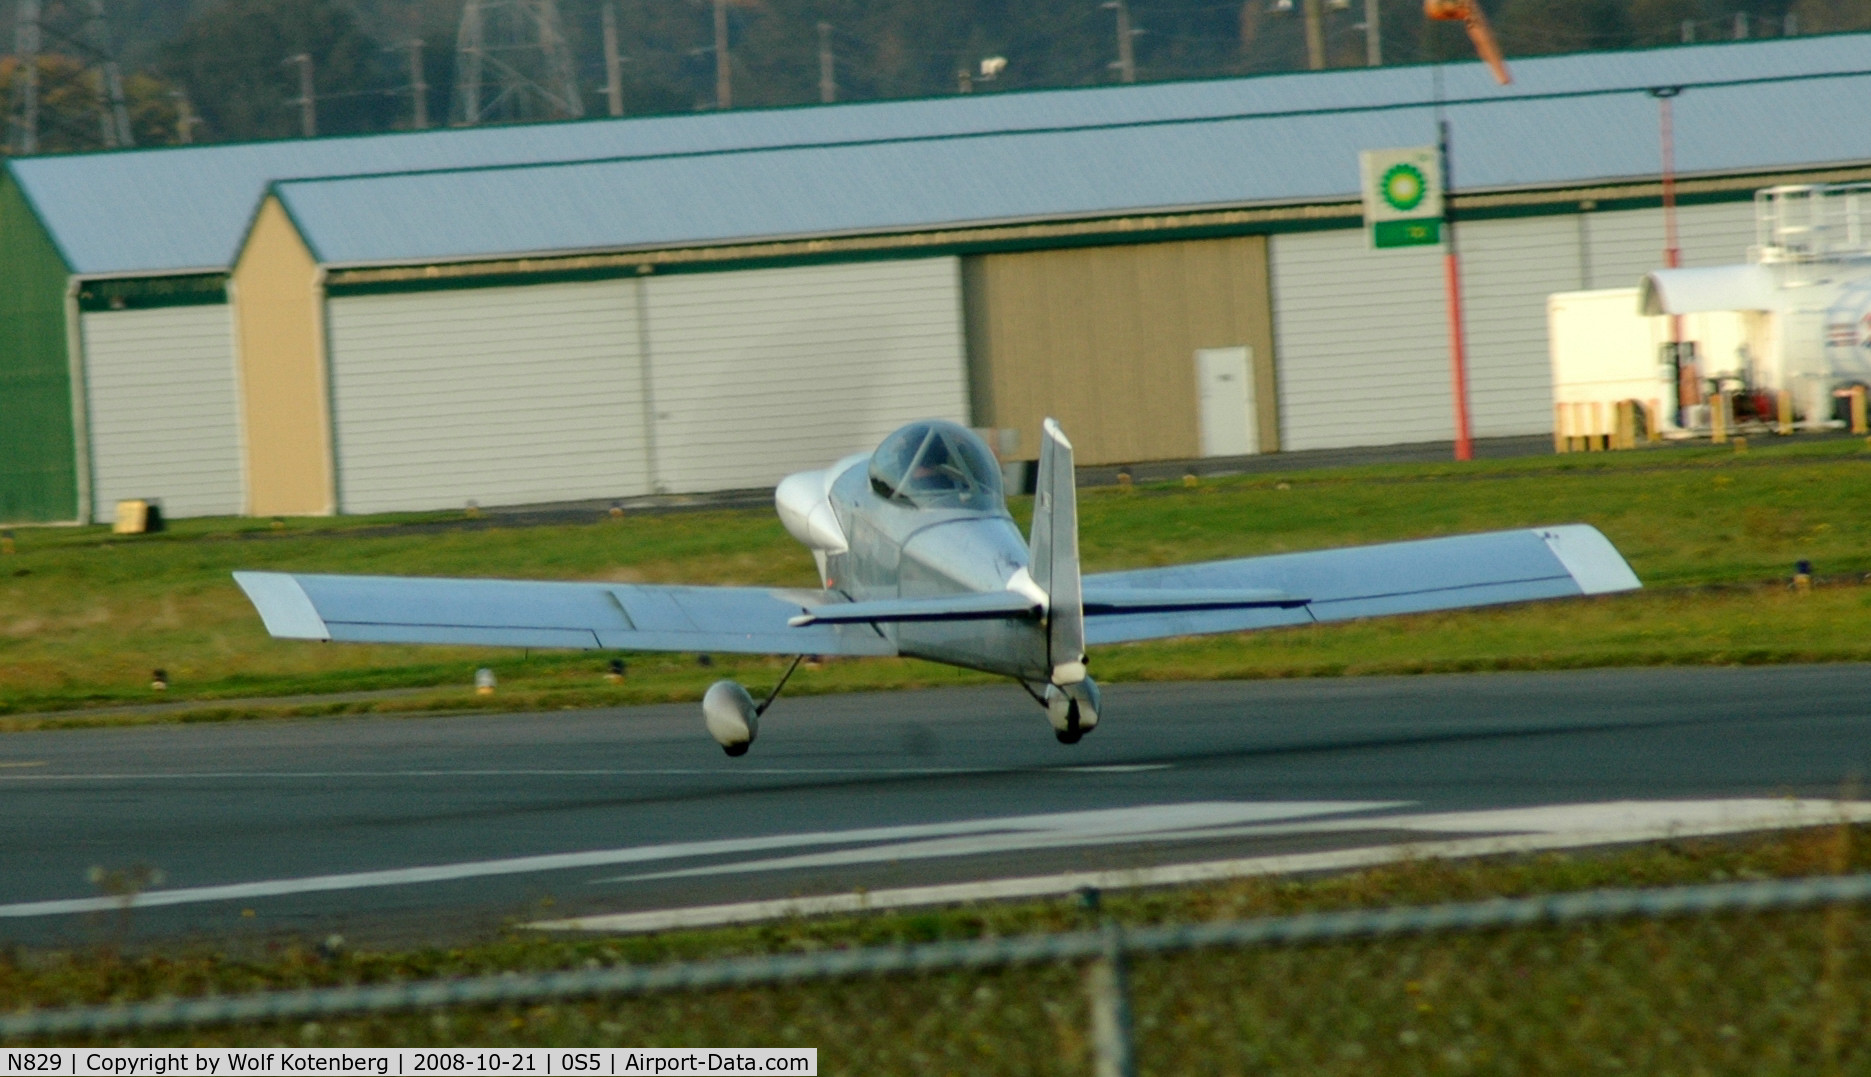 N829, 2003 Vans RV-4 C/N 2074, almost a landing, therefore a go-around